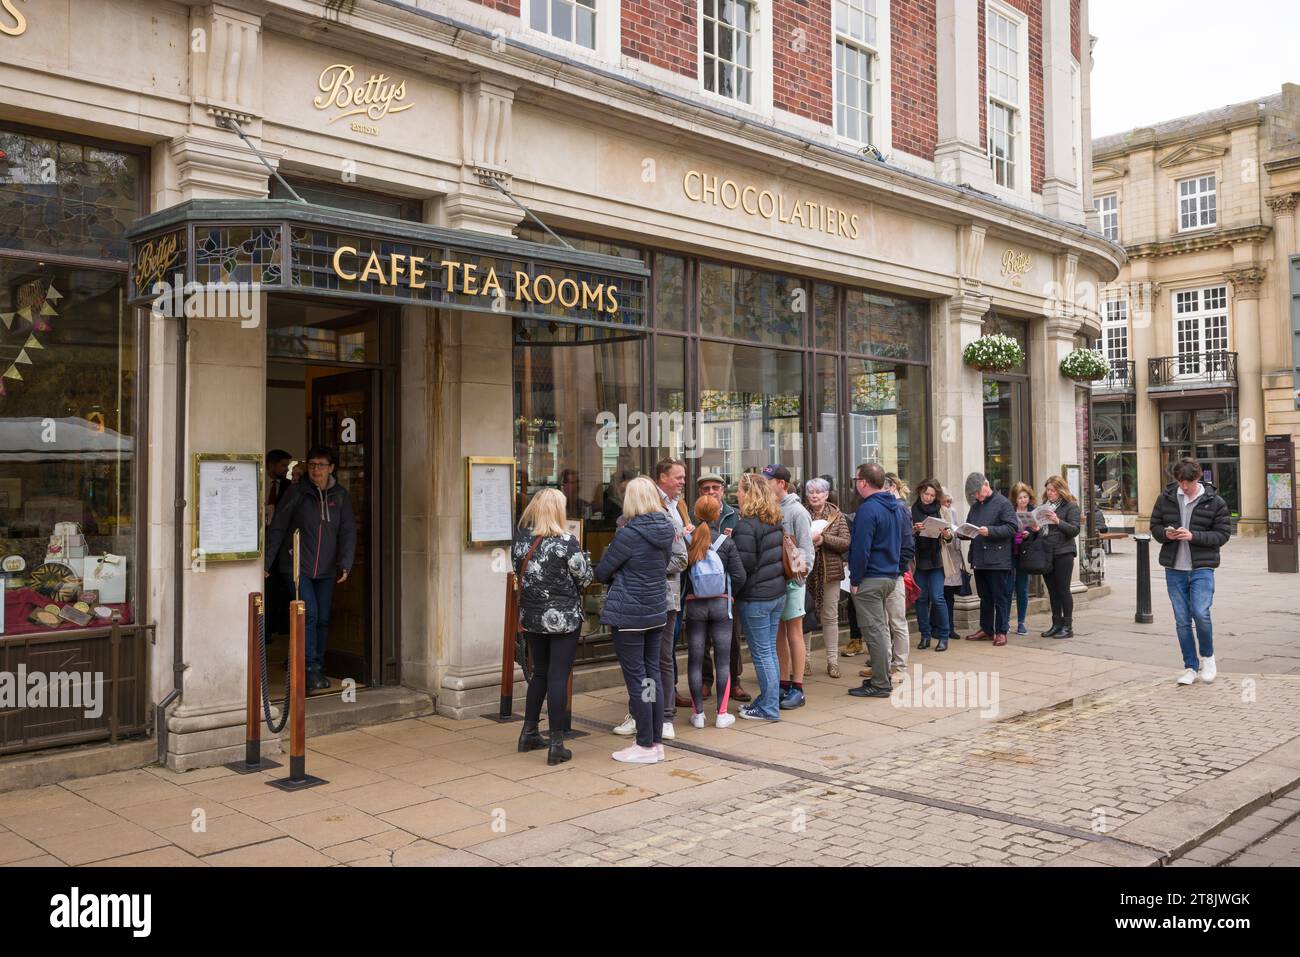 YORK, UK - April 19, 2023. People queueing outside Bettys Tea Rooms, a famous cafe in York, UK Stock Photo